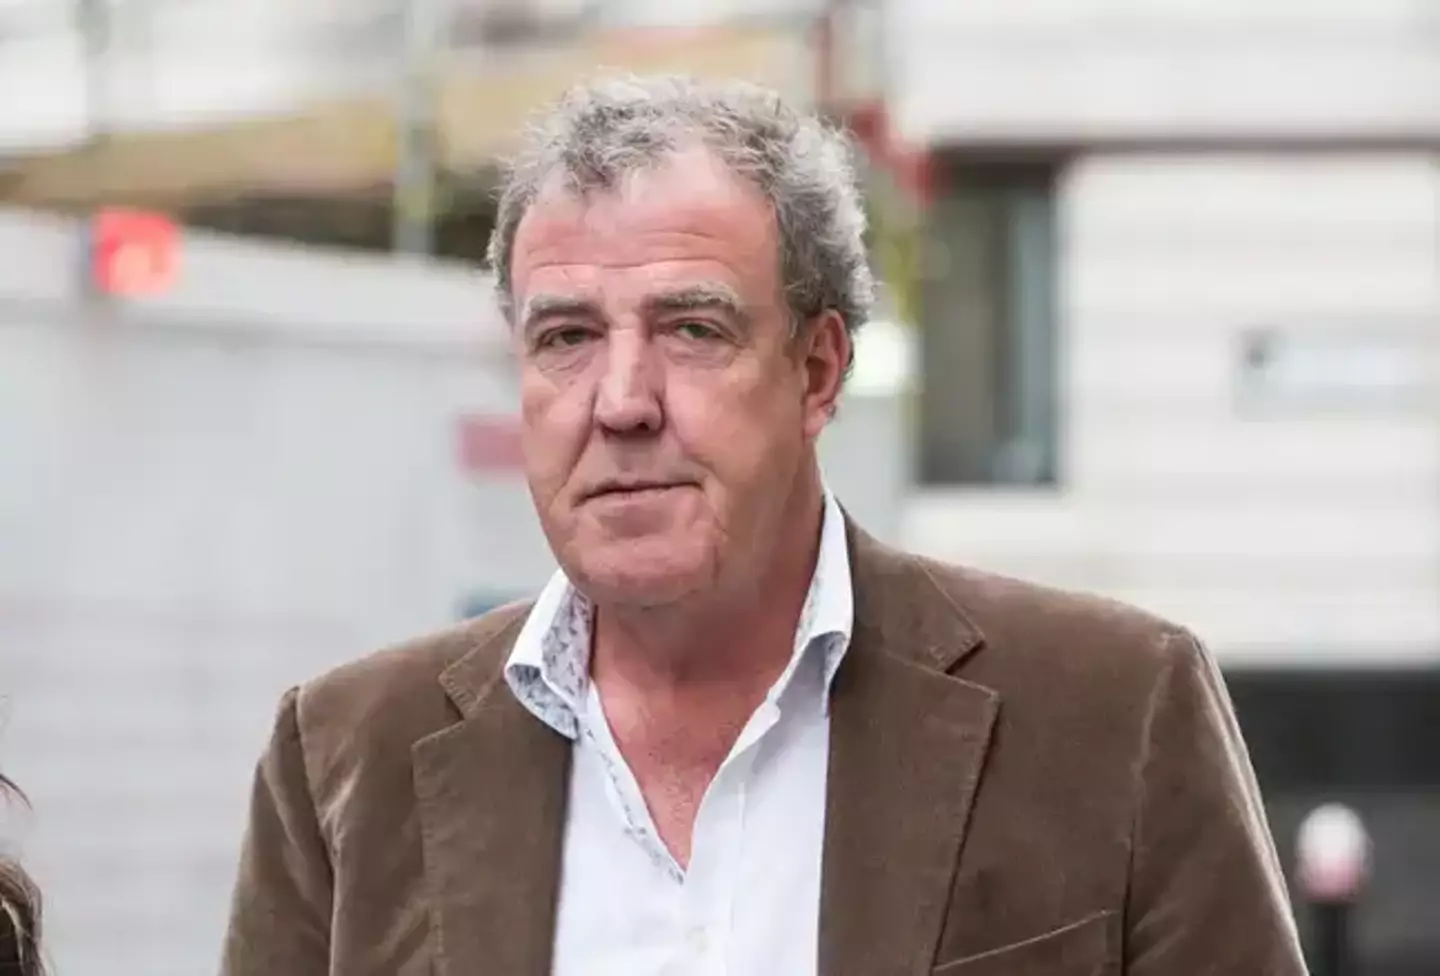 Jeremy Clarkson has faced severe backlash following his hateful column.